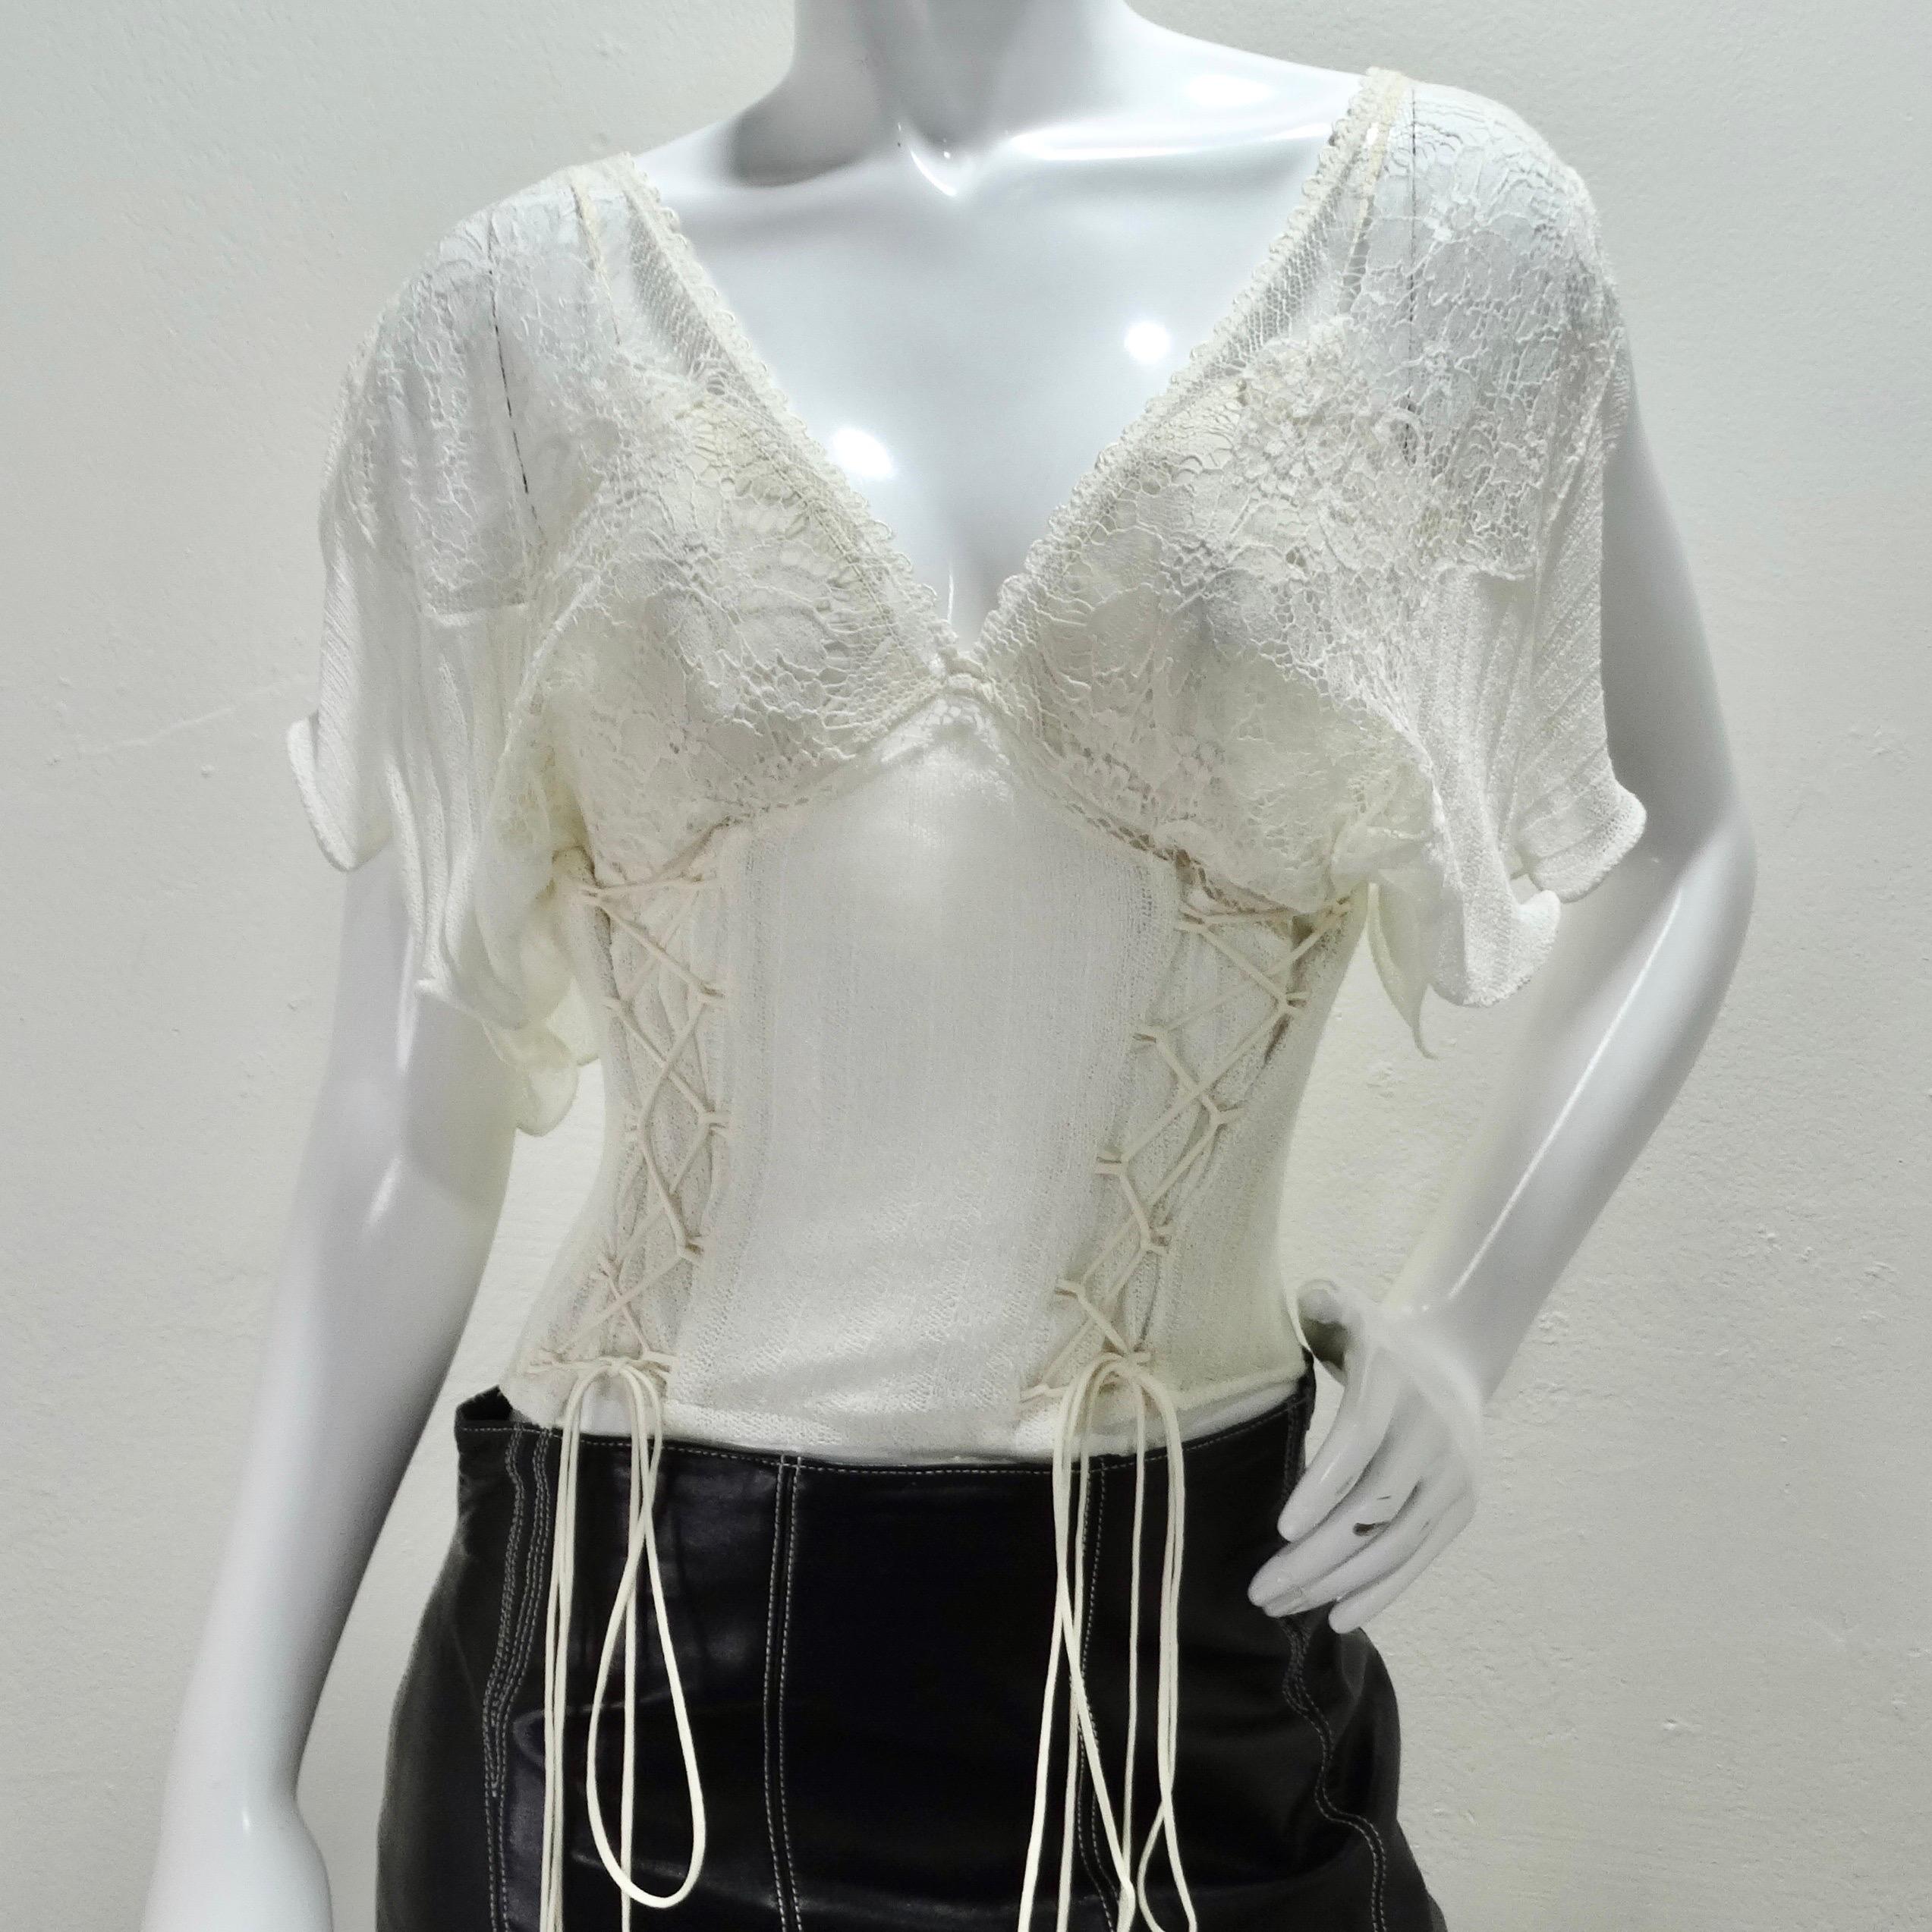 This vintage La Perla bustier is soo delicate and feminine! The perfect wearable bustier features a unique draped short sleeve which adds a playful touch. White rib knit cotton pairs beautifully white lace to create this timeless bustier top. A